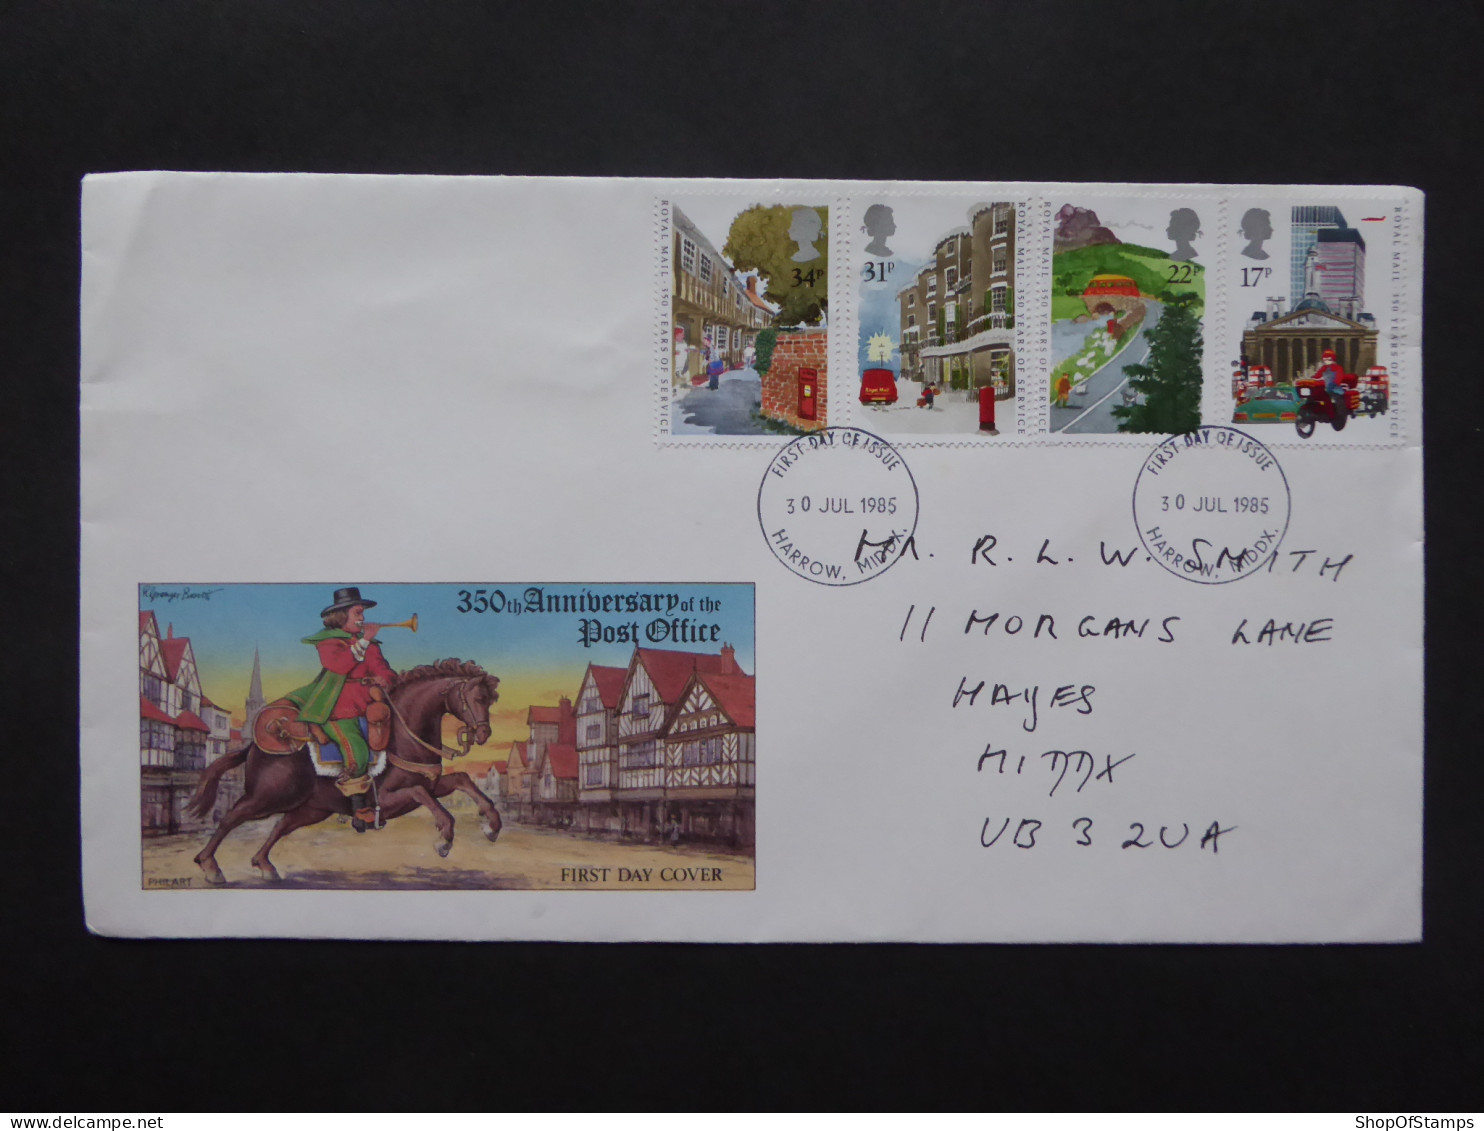 GREAT BRITAIN SG 1290-93 ROYAL MAIL PUBLIC POSTAL SERVICE 350YR FDC    - Unclassified